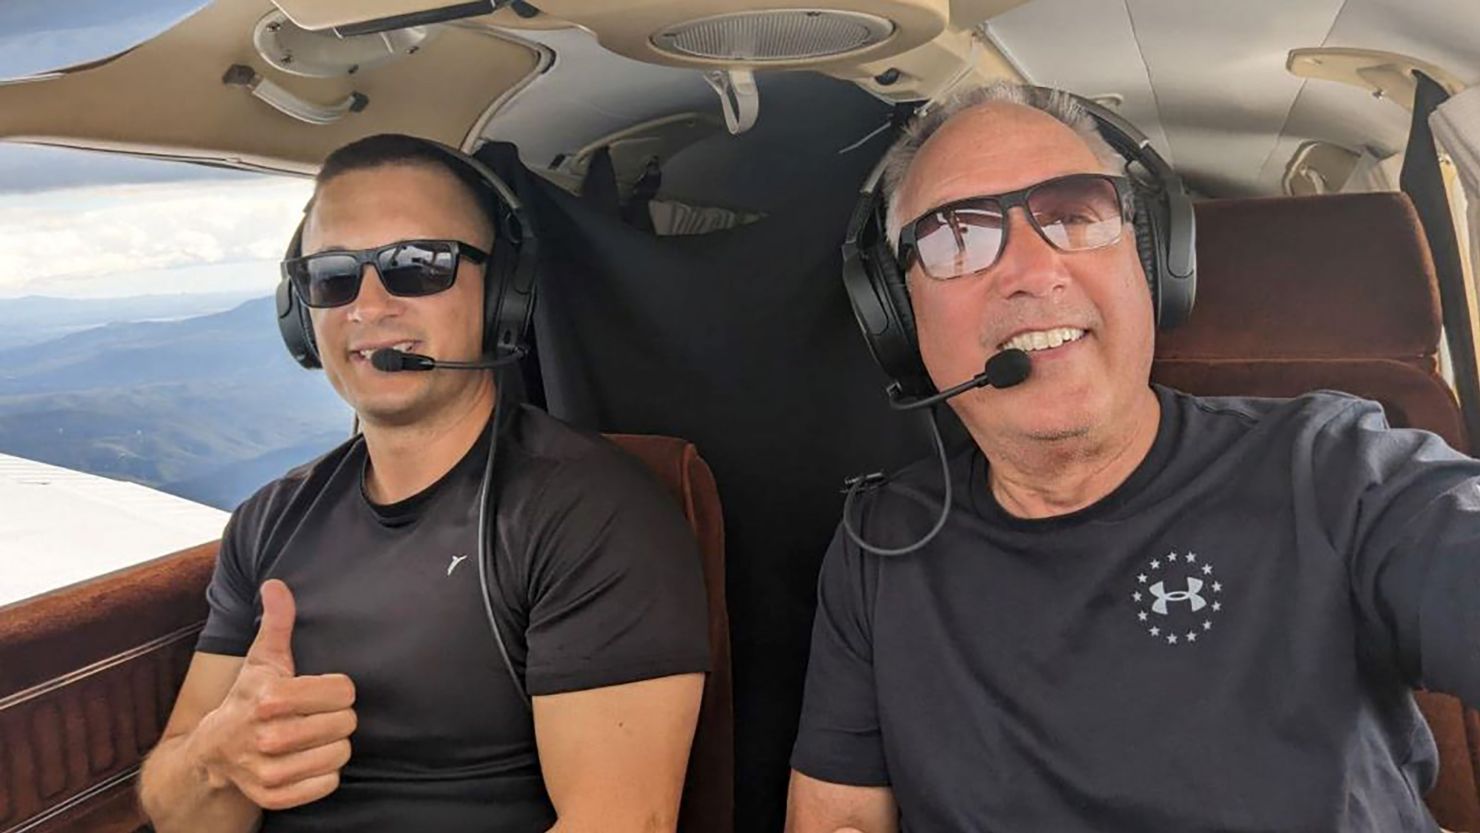 Pilots Aaron Wilson (left) and Barry Behnfeldt (right) attempted a world-record-breaking flight across the US.